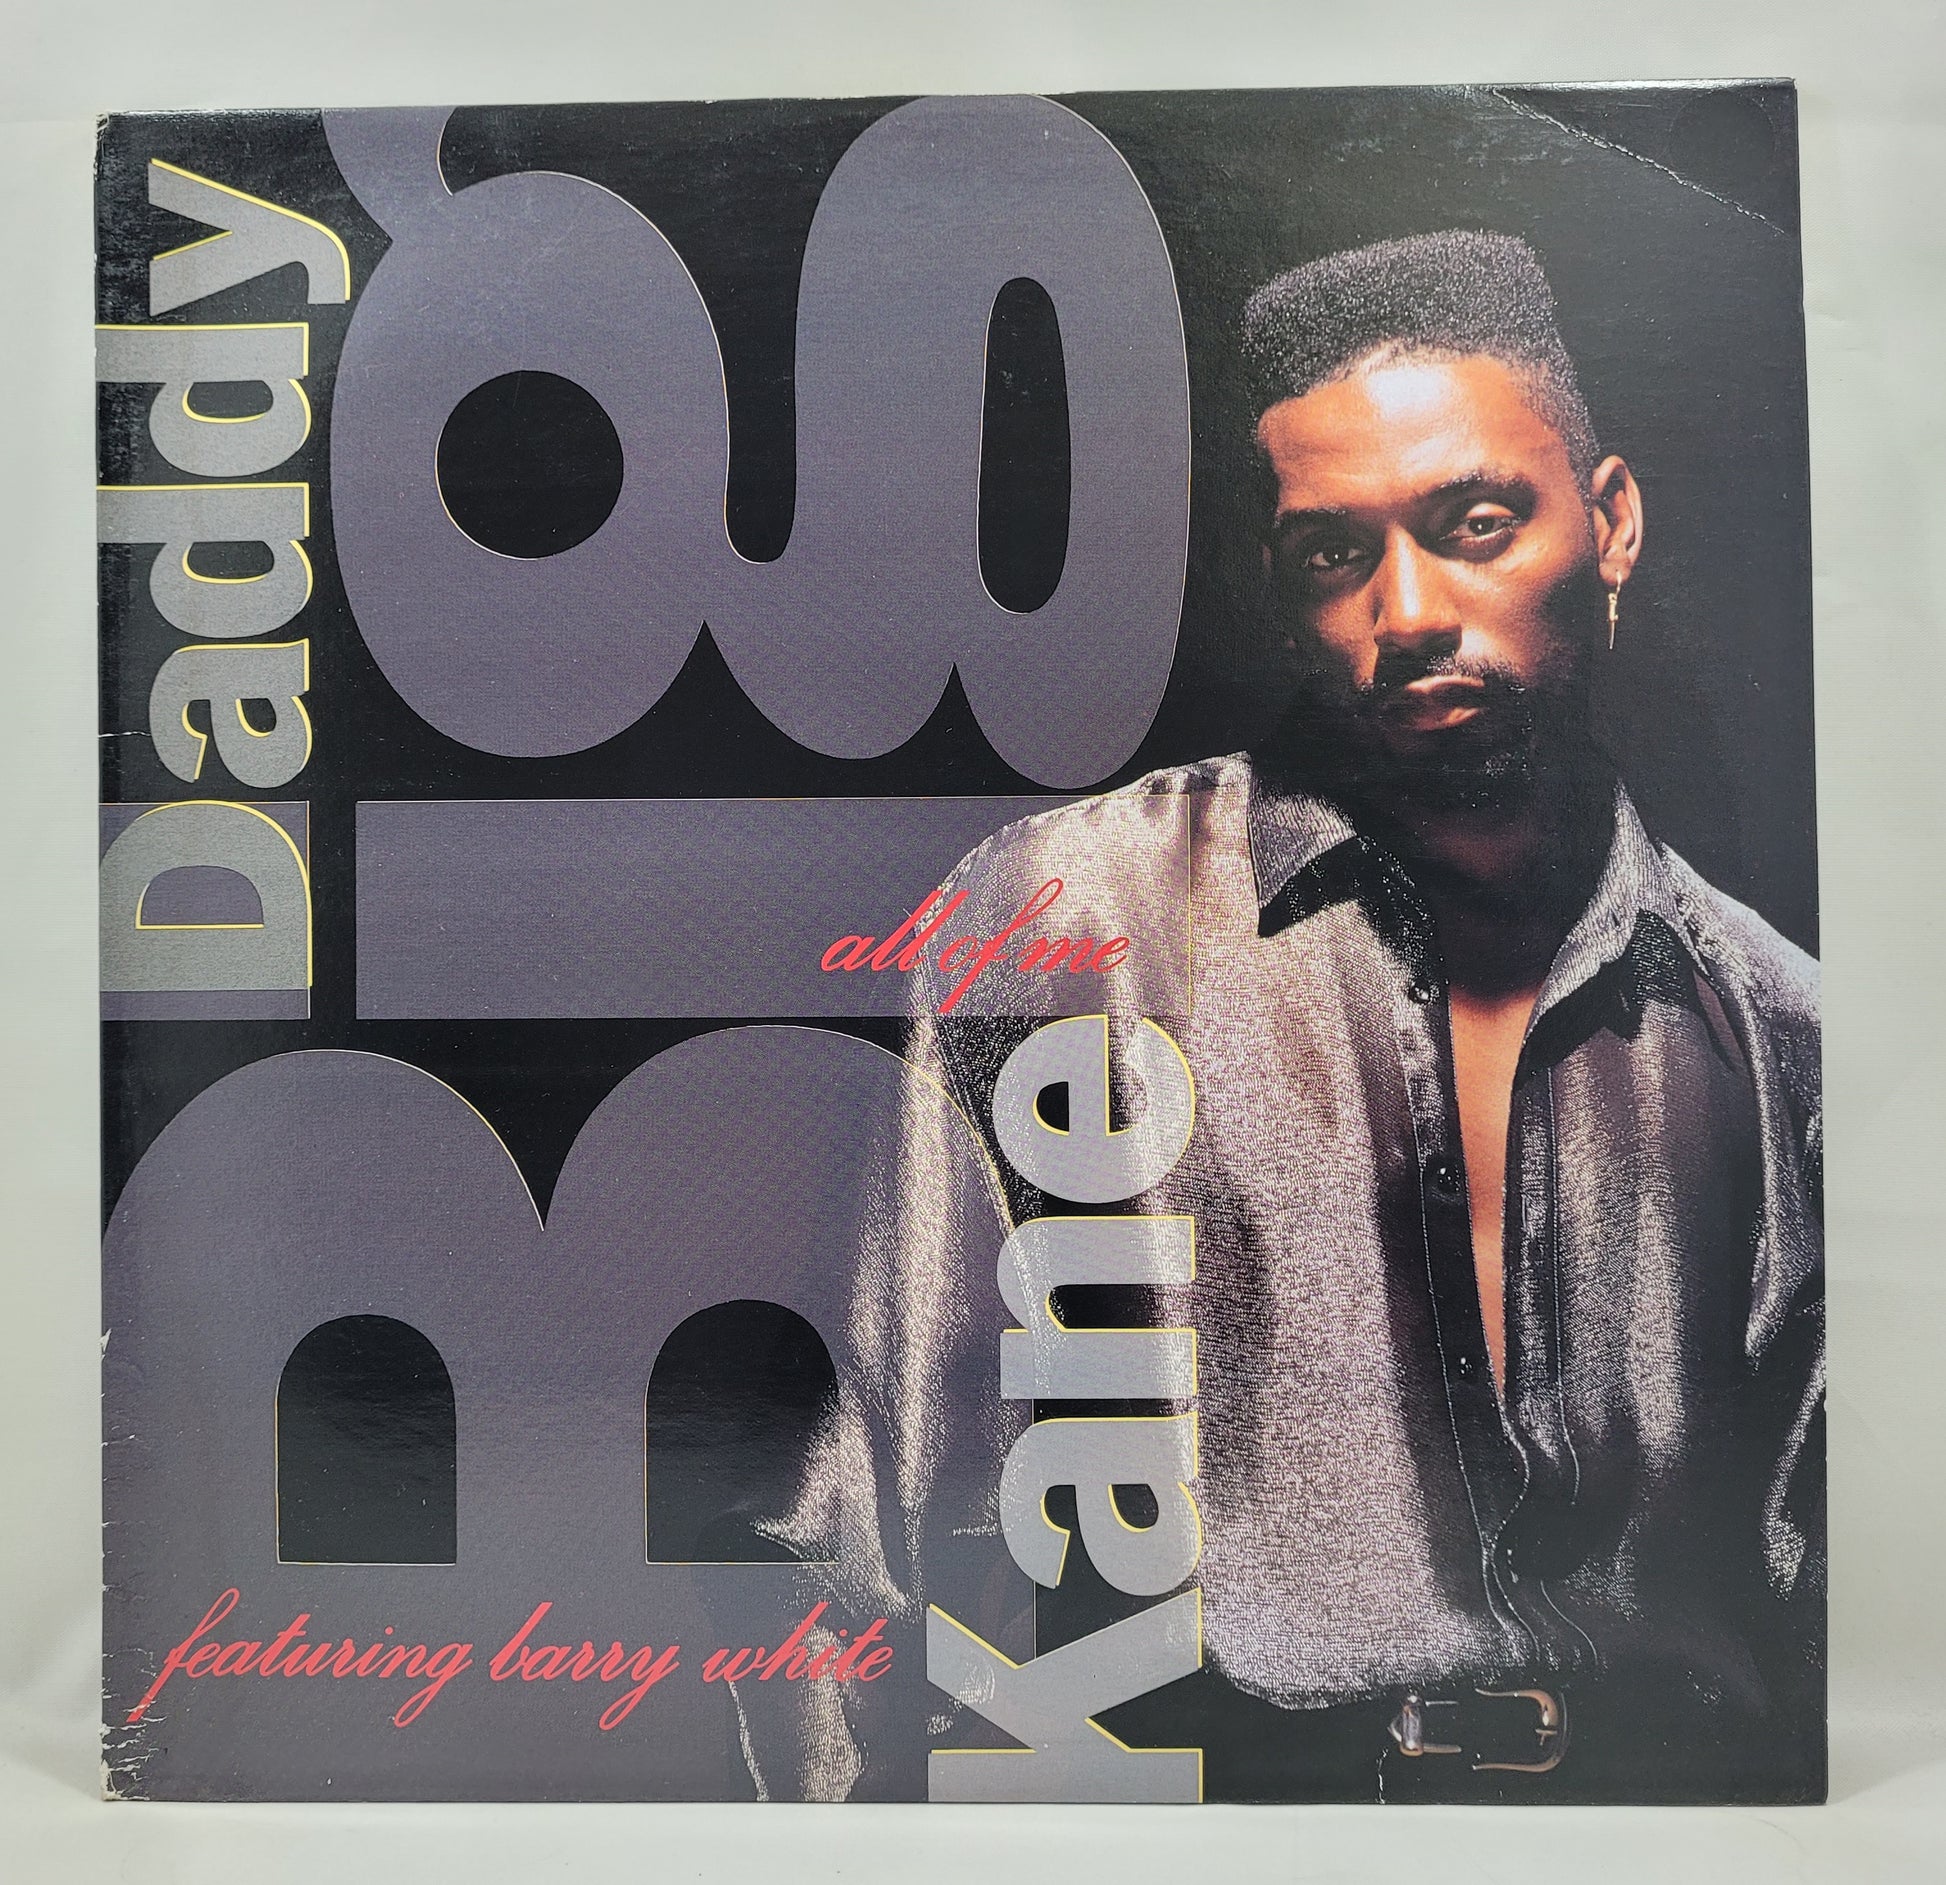 Big Daddy Kane Feat. Barry White - All of Me [1990 Promo] [Used Vinyl Record 12" Single]